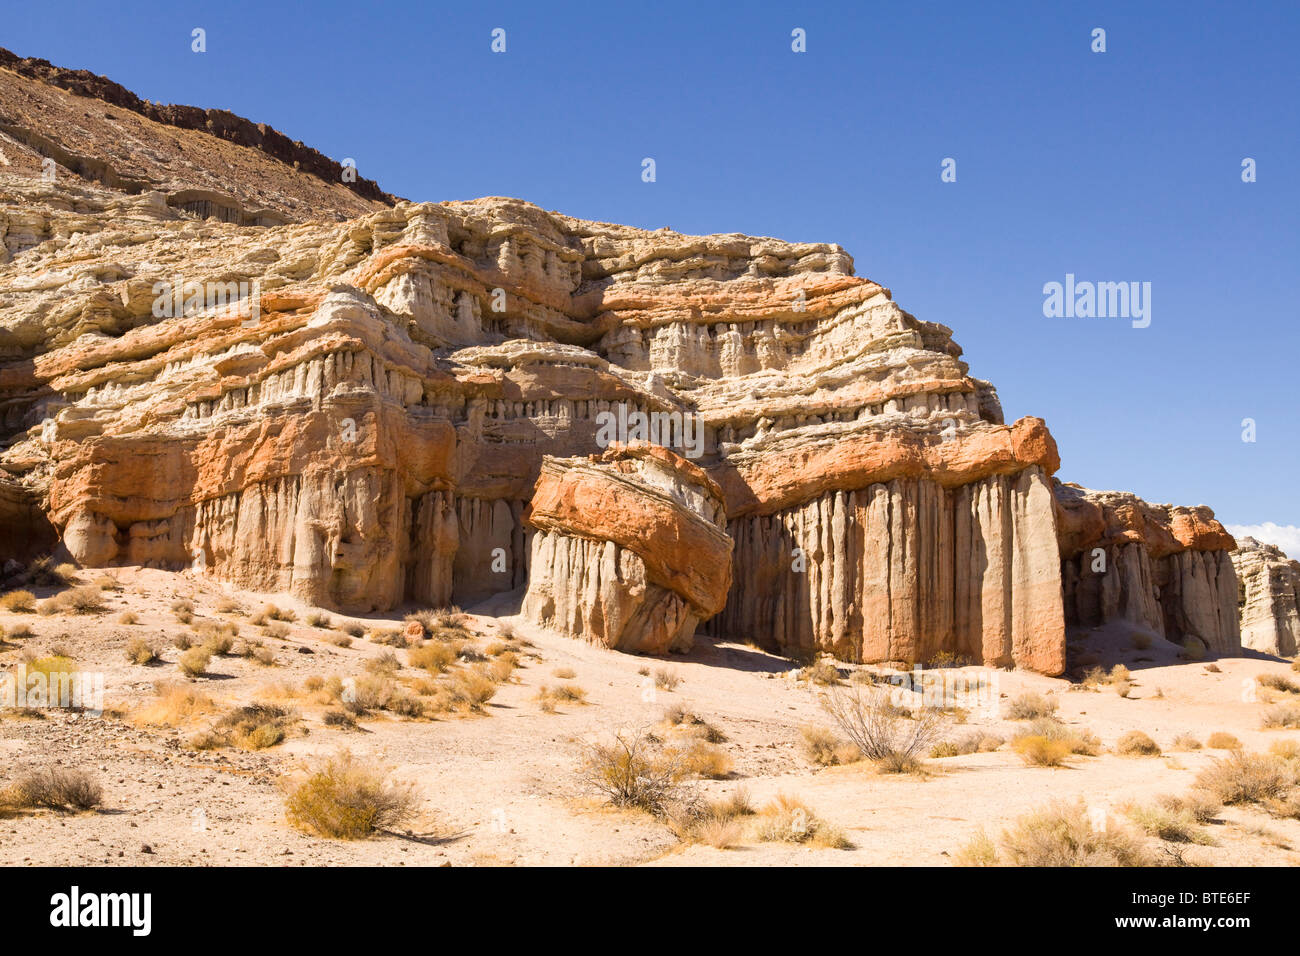 Red Rock Canyon State Park rock formations - California USA Banque D'Images